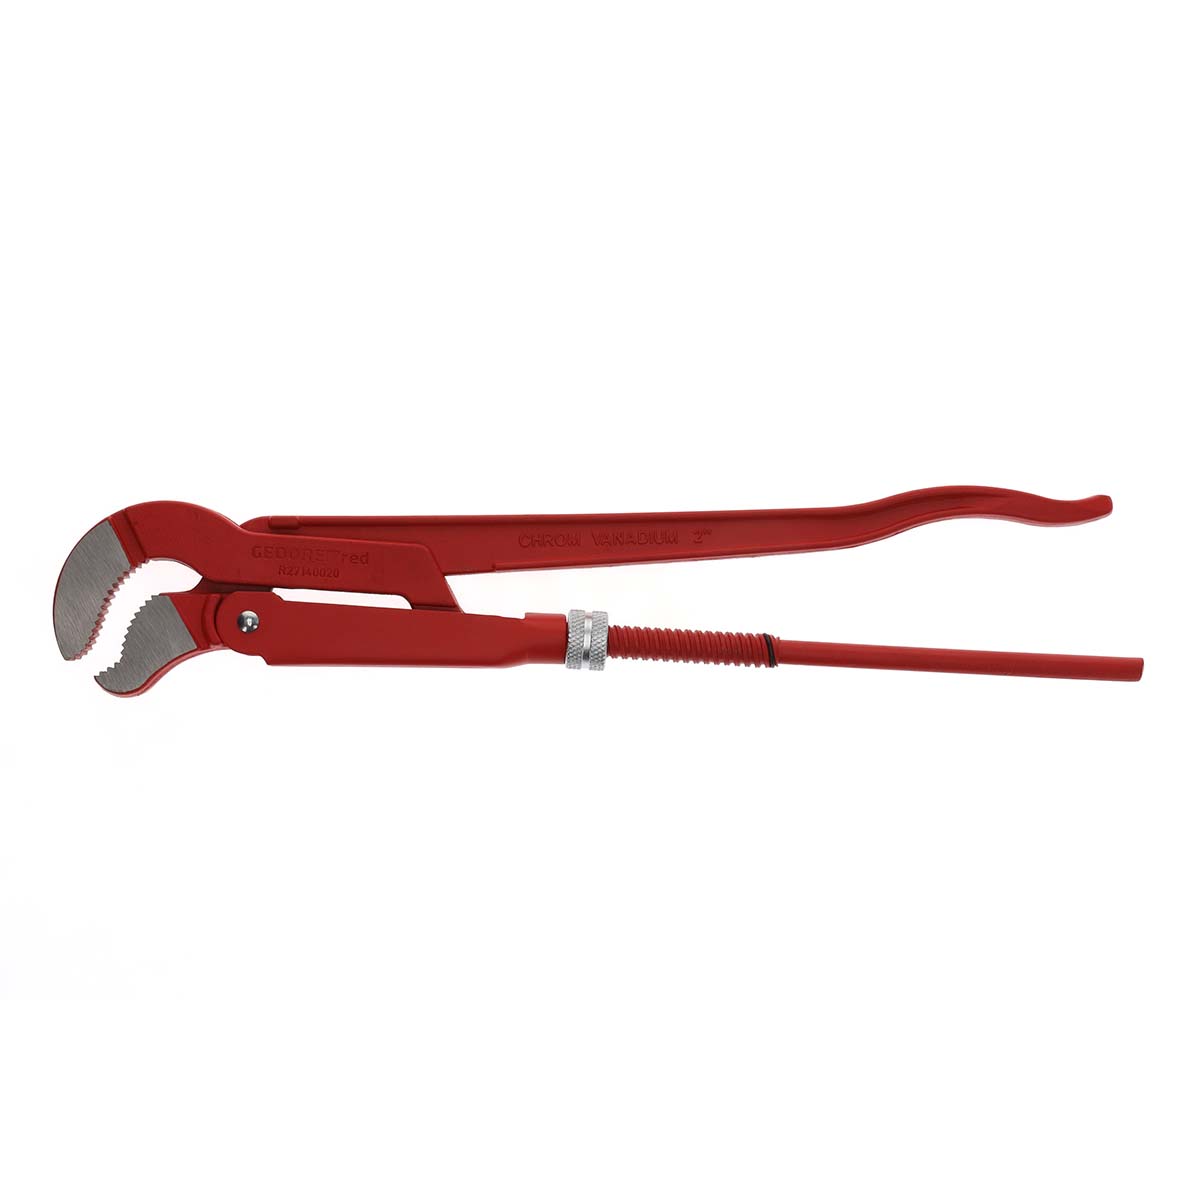 GEDORE red R27140020 - Pipe pliers, S-mouth, 2", L=535 mm (3301169)